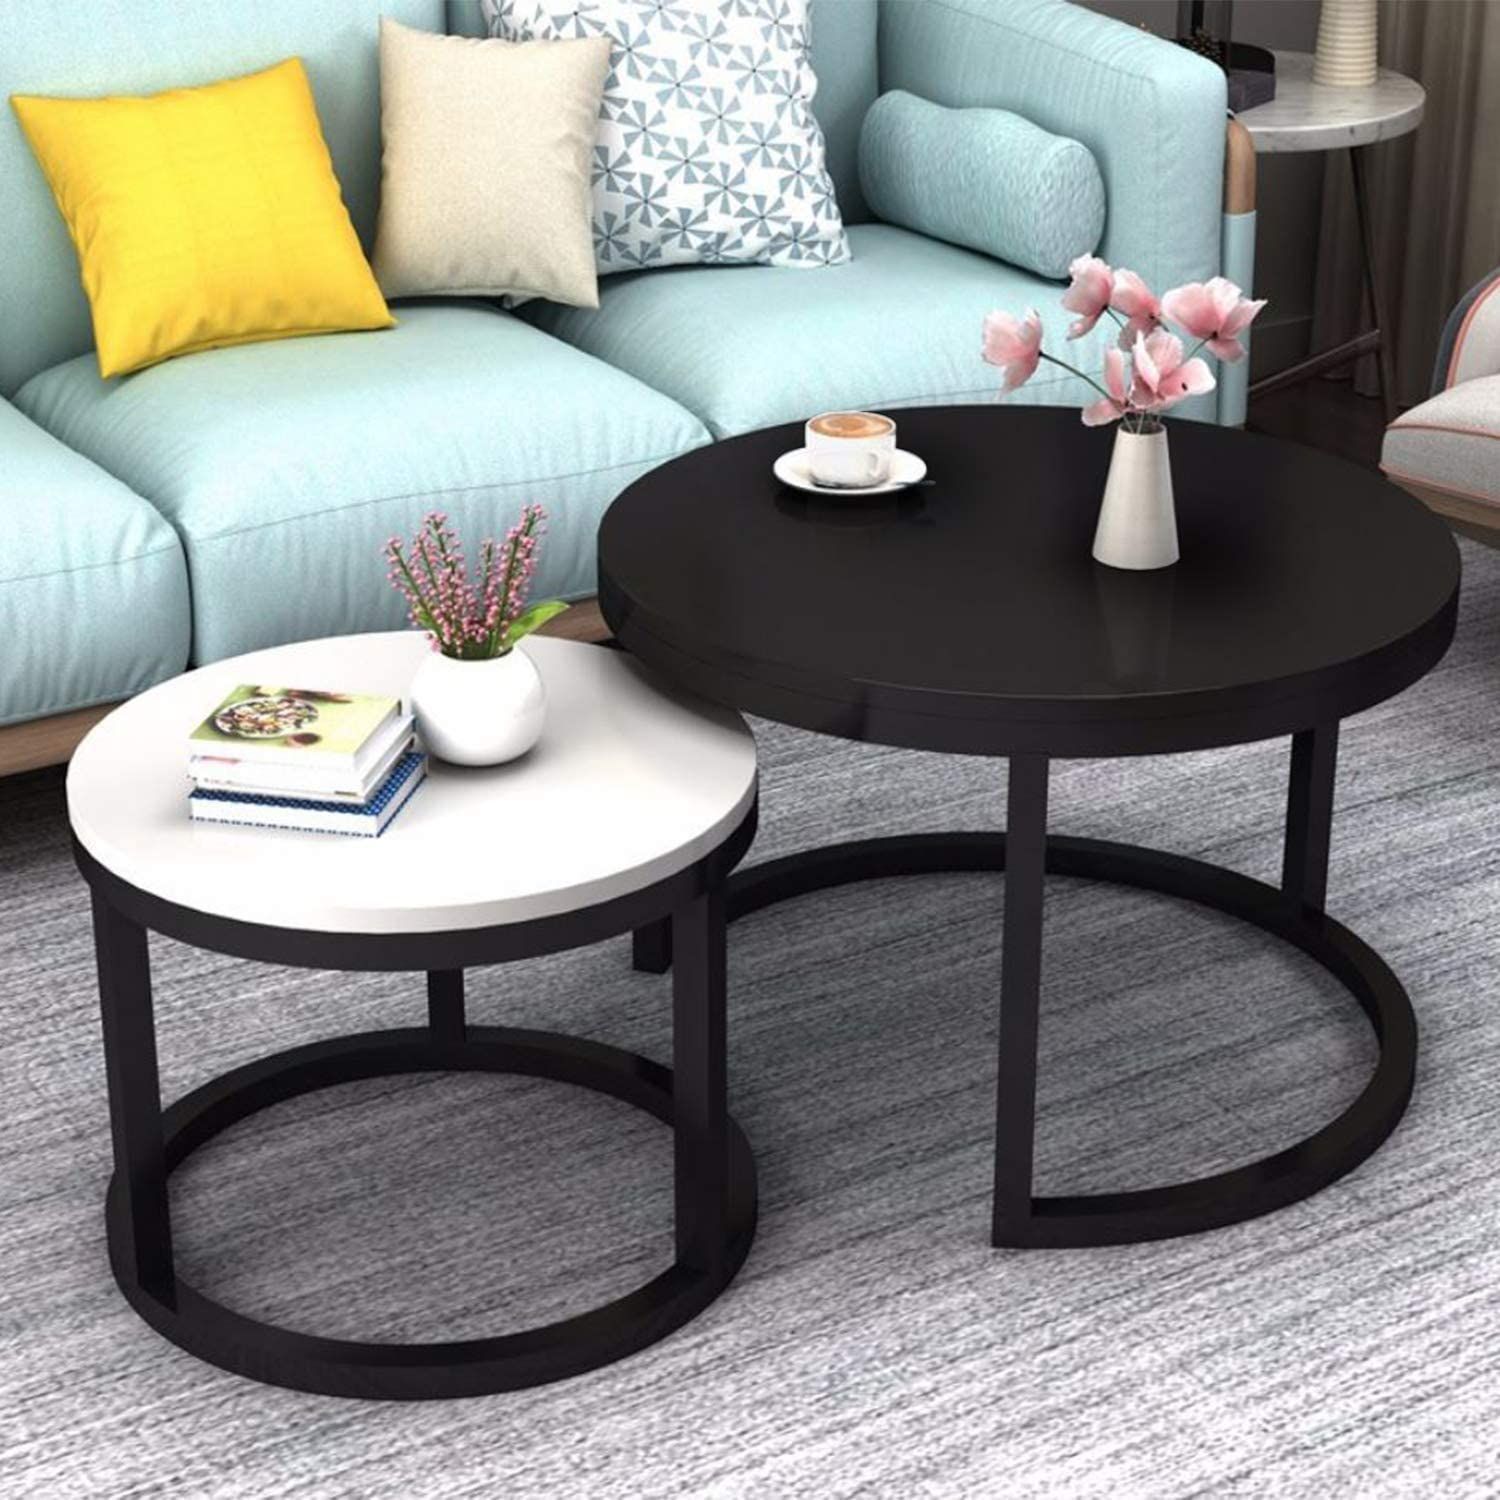 2 Round Tea Table Coffee Table Desk Sets | Black & White Inside Caviar Black Cocktail Tables (View 1 of 15)